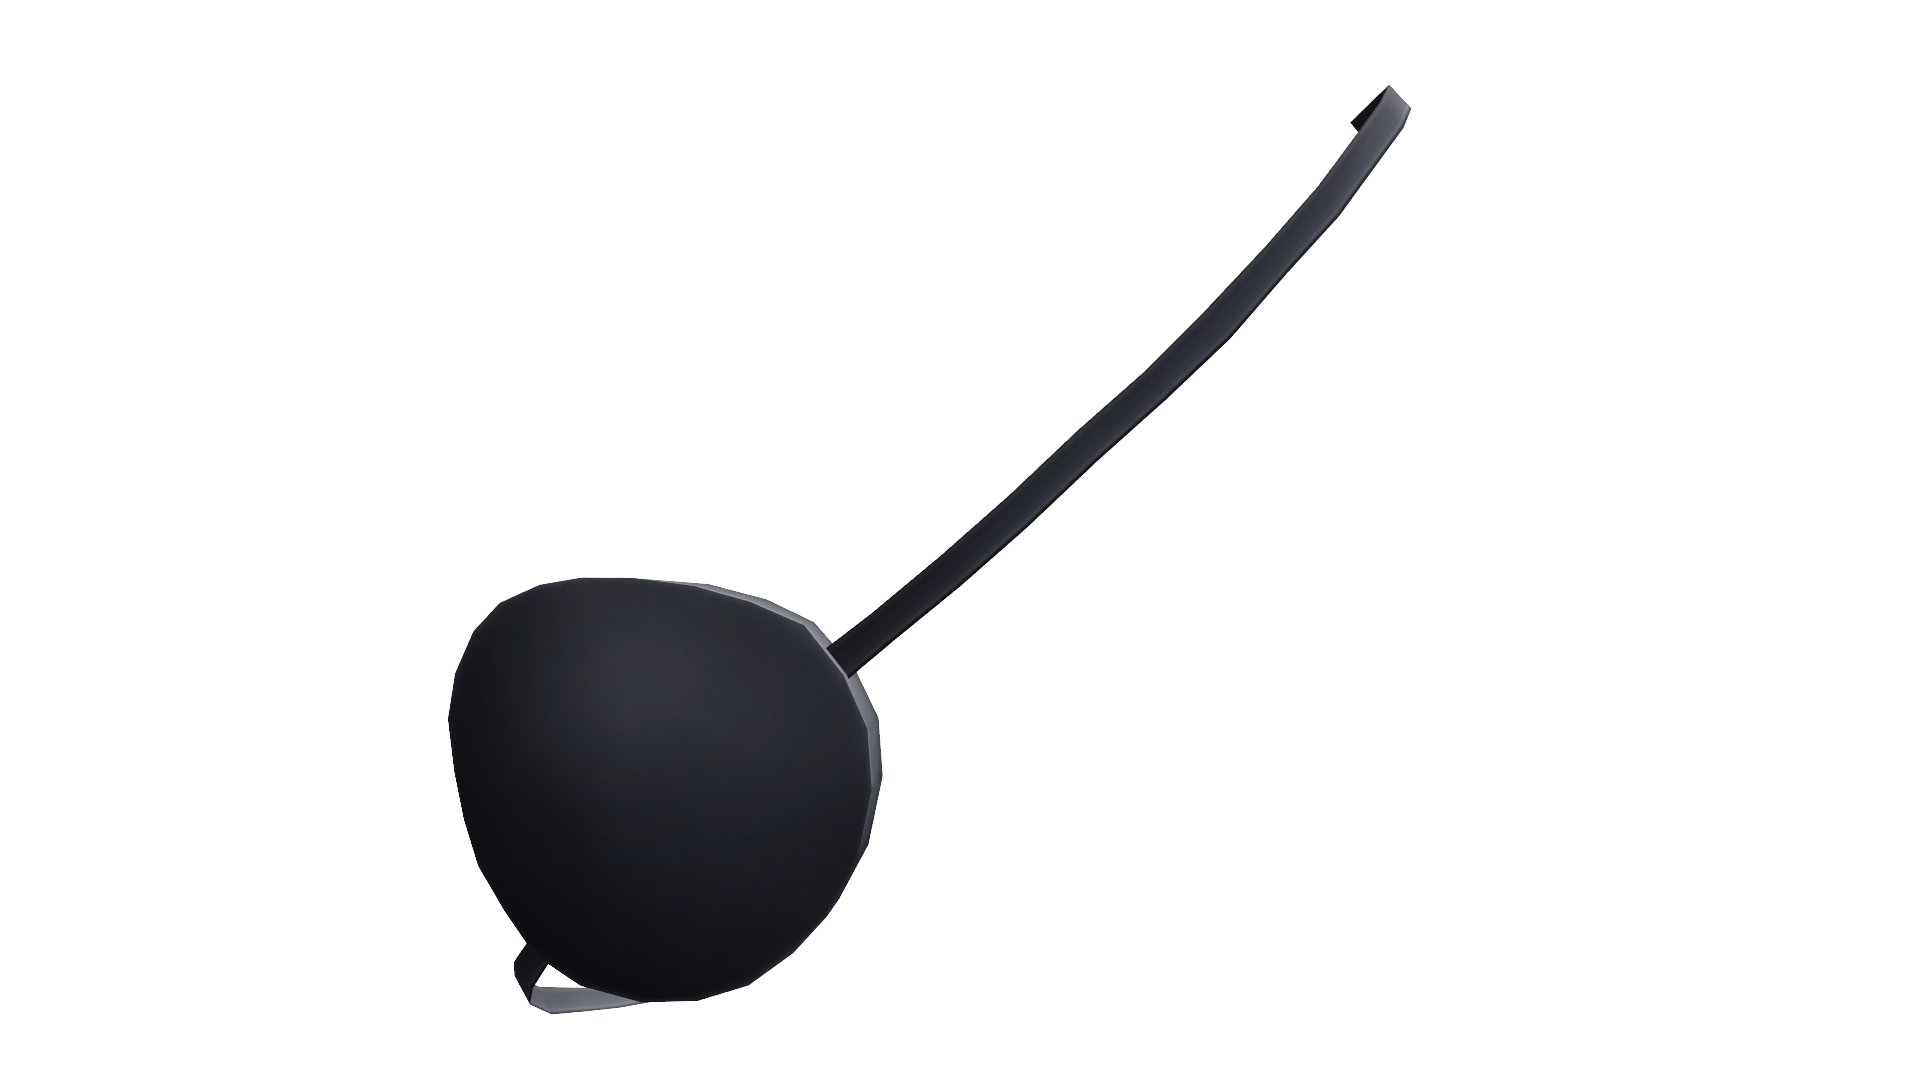 Eye Patch PNG Photo